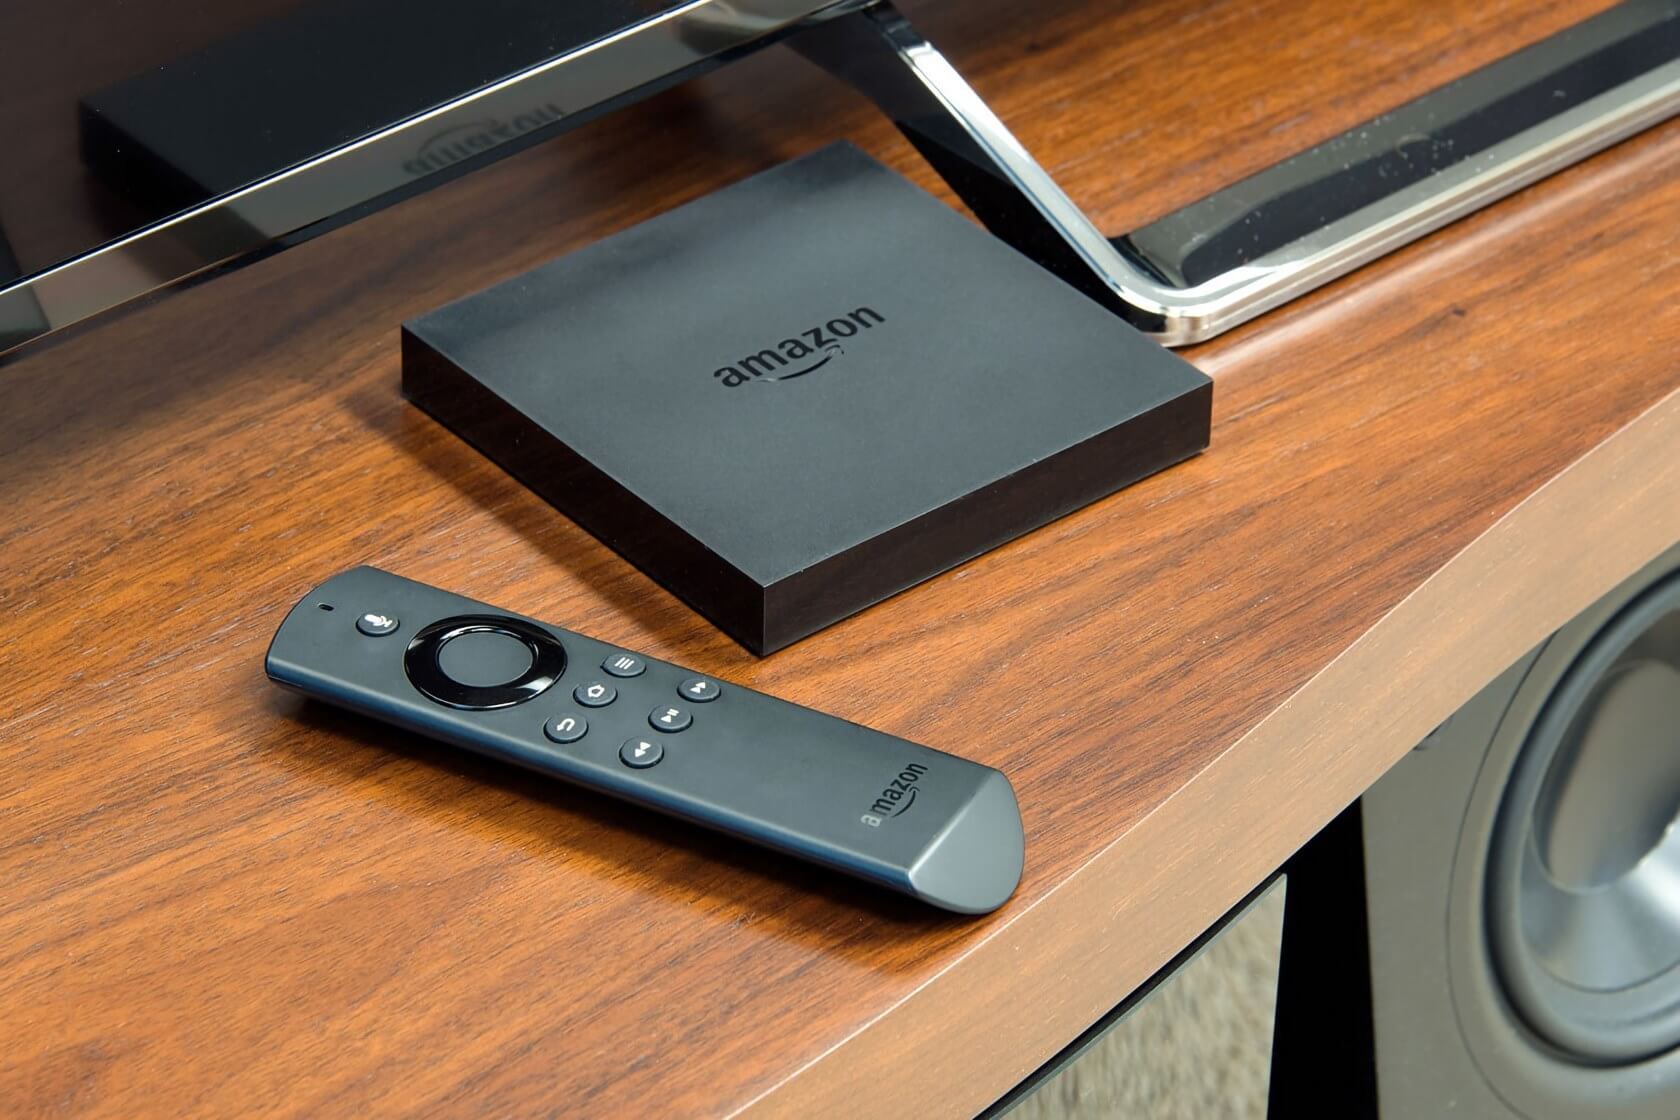 Amazon's Fire TV platform now boasts over 34 million monthly active users